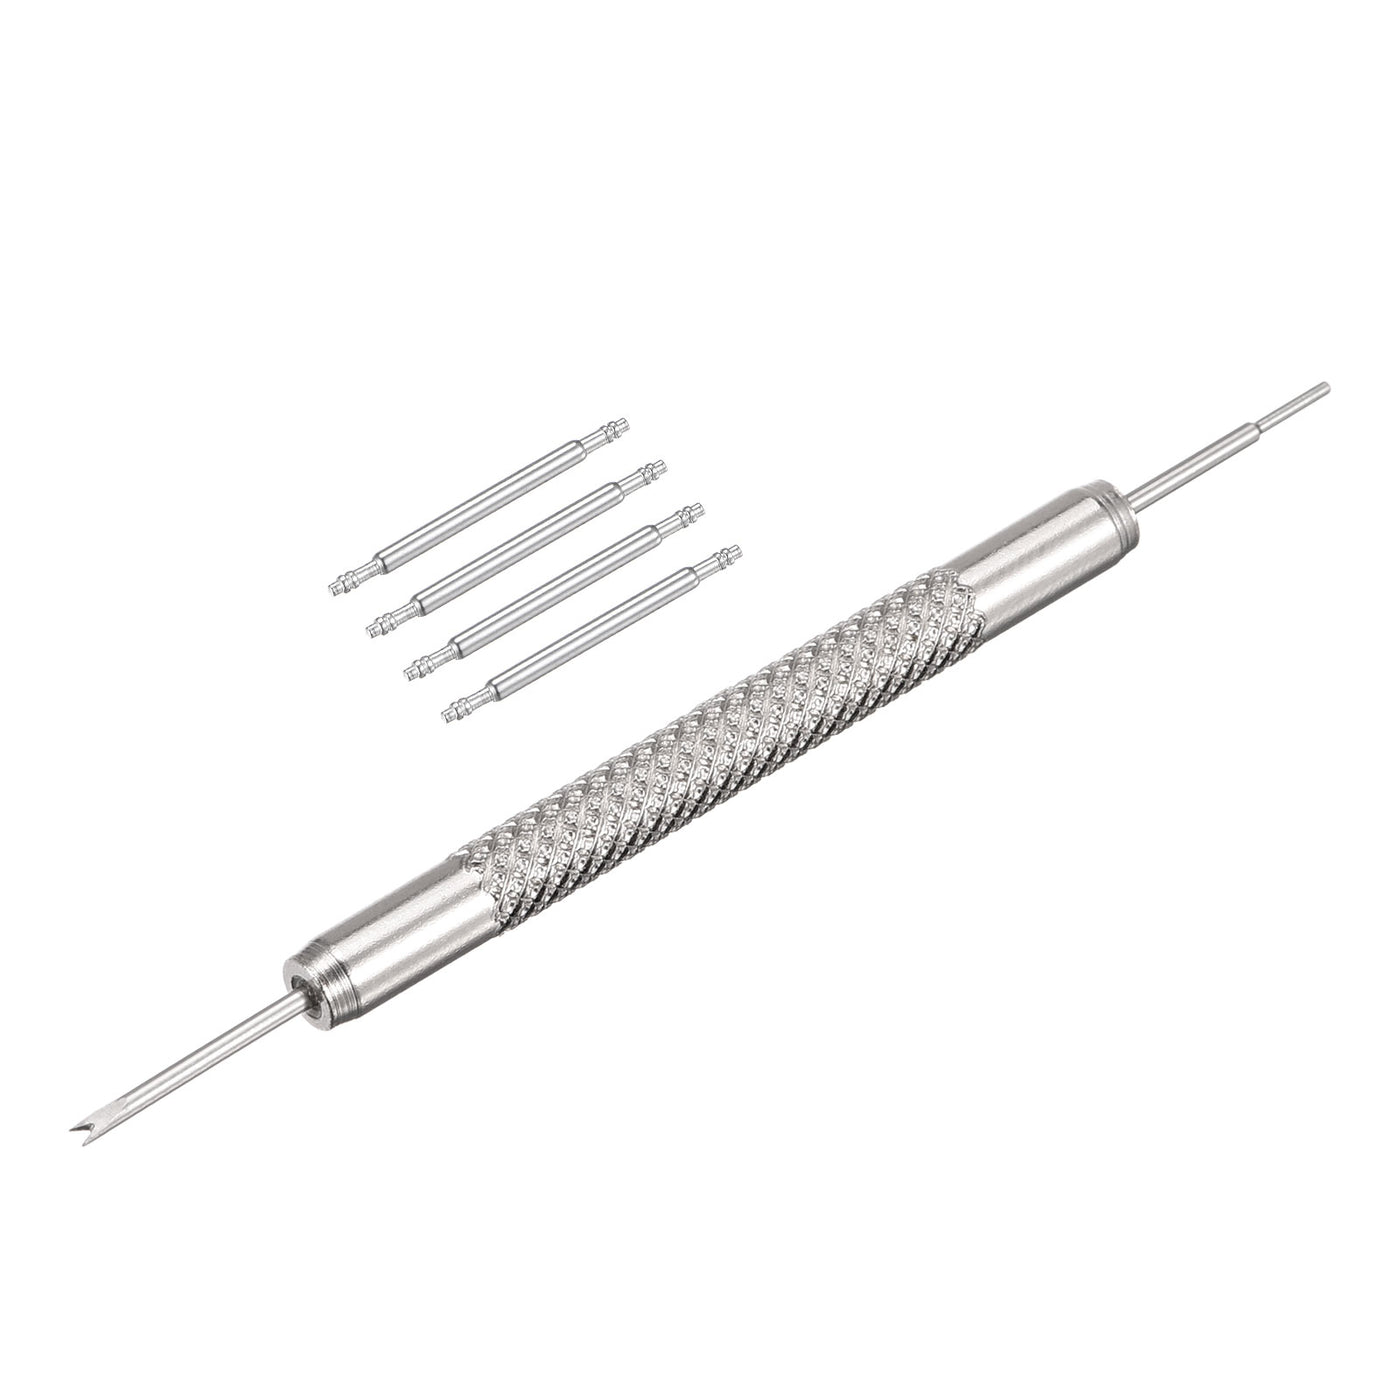 Uxcell Uxcell Stainless Steel 22mm Watch Spring Bars 4Pcs with Dia 1.5mm Spring Bar Removal